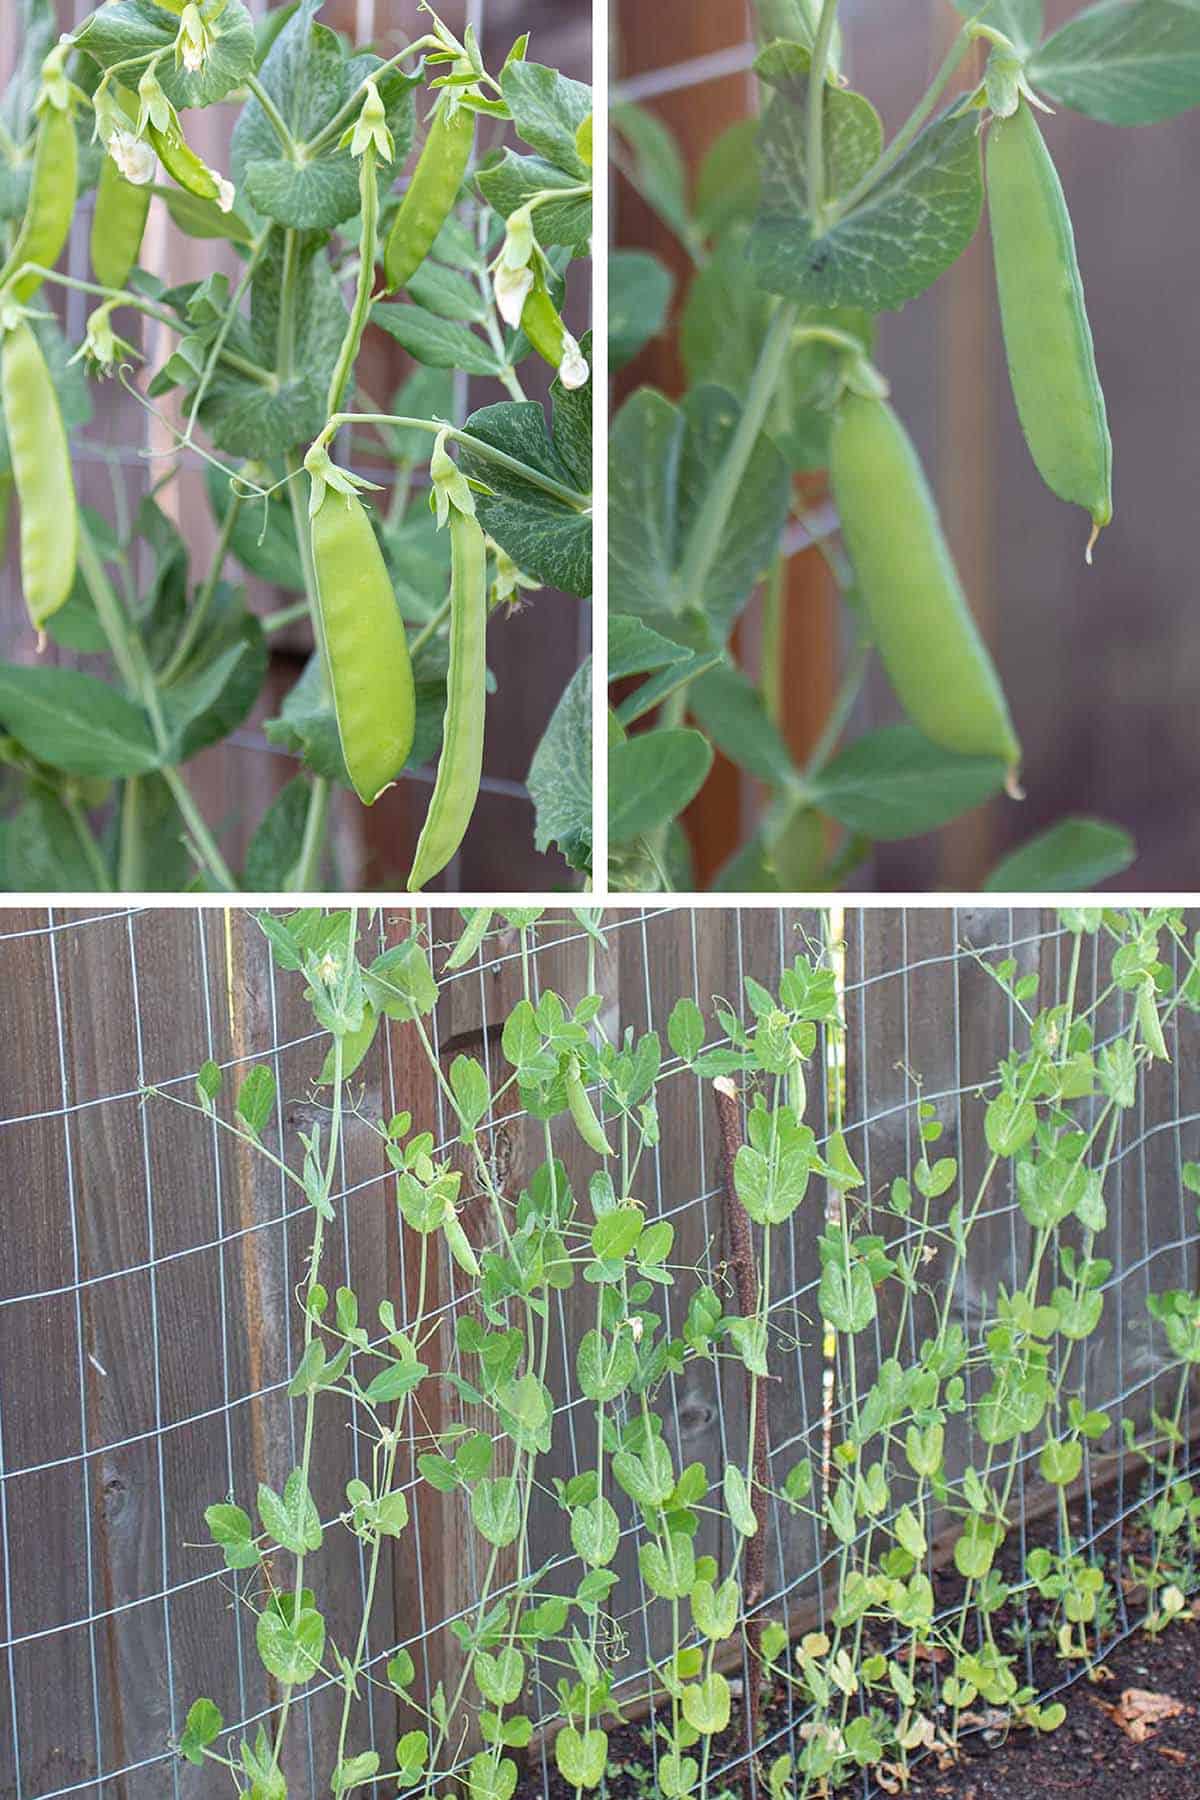 Three images of peas being grown in a garden.